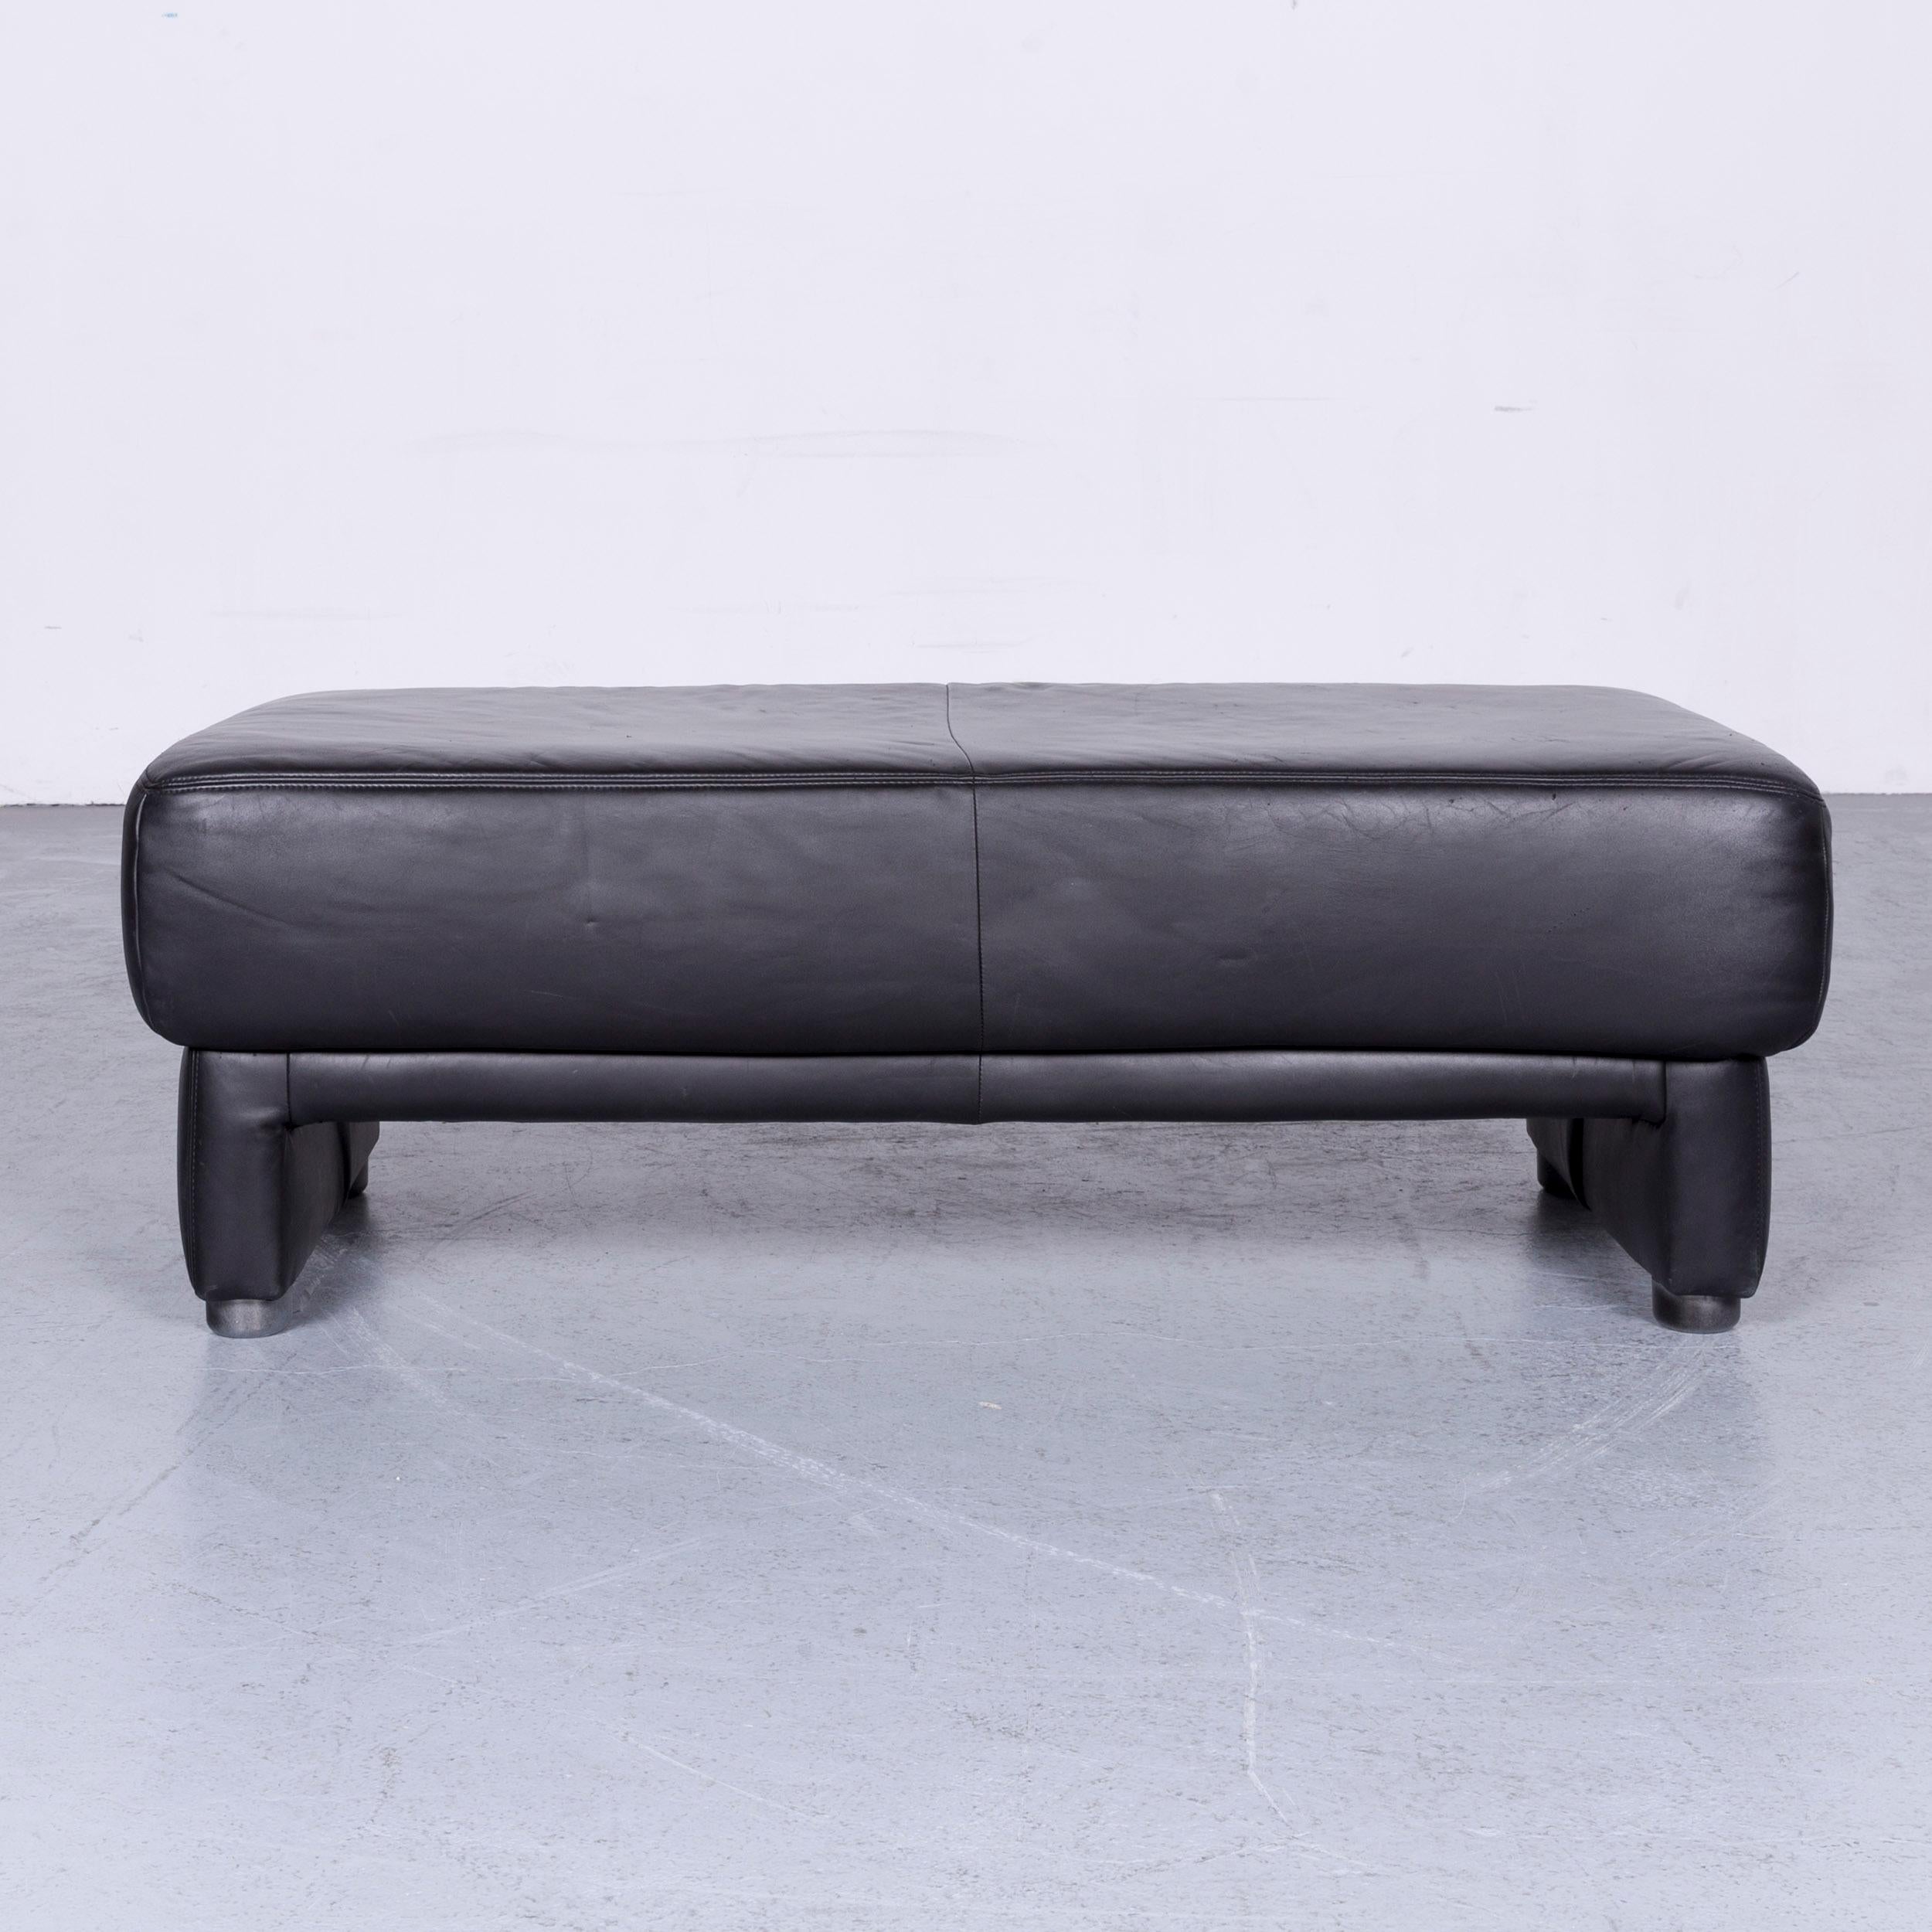 Koinor Designer Leather Sofa Black Two-Seat Couch 7